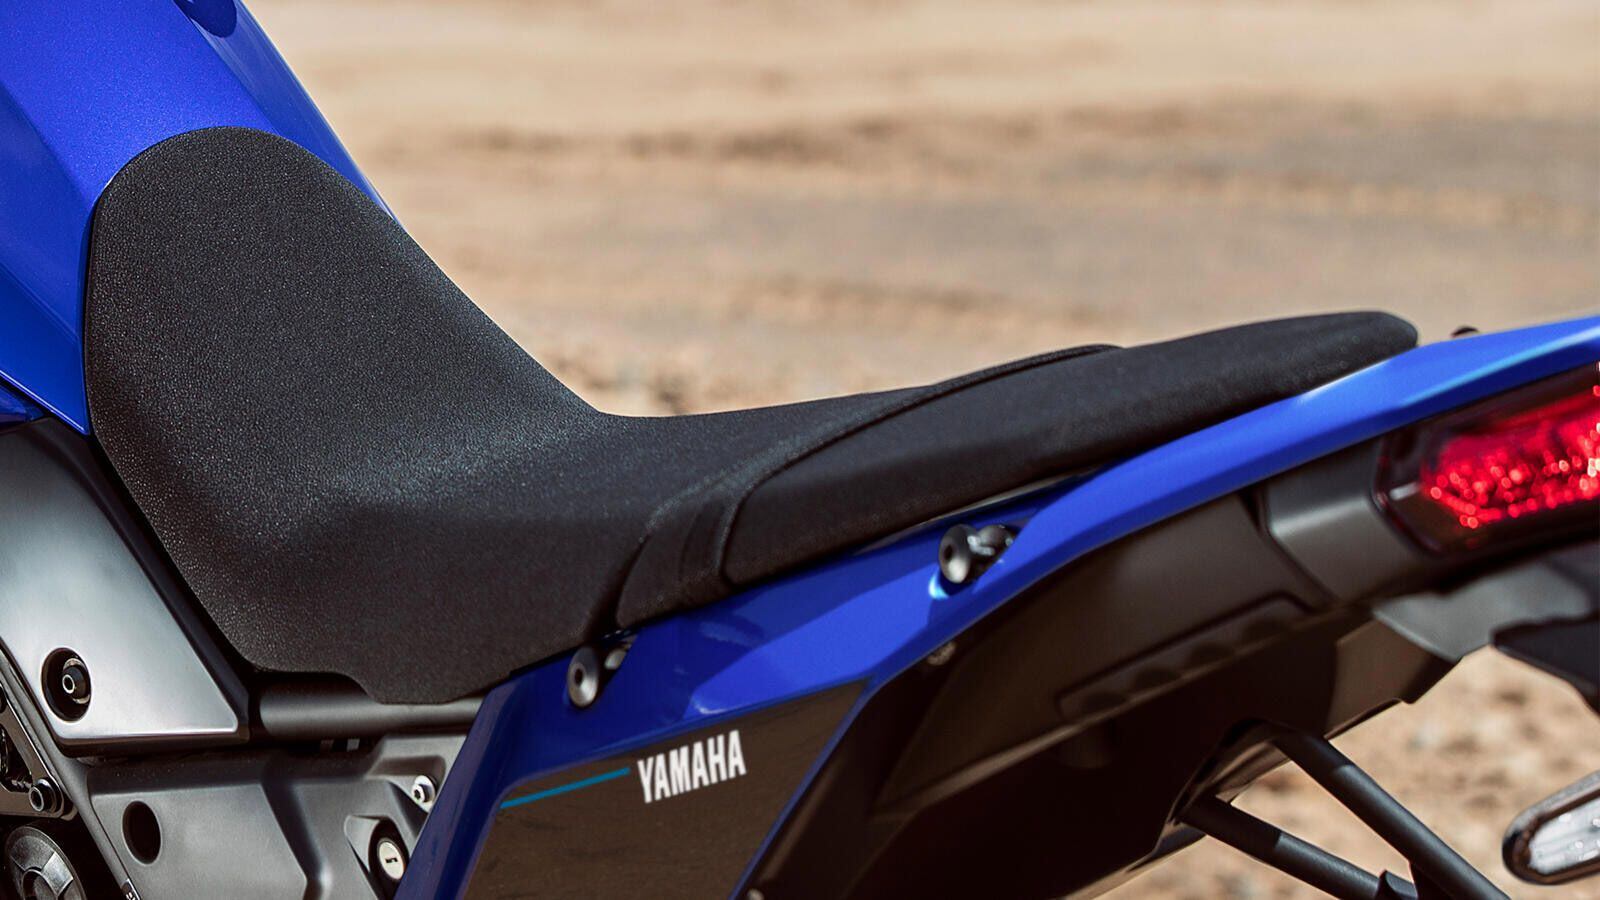 The Ténéré 700 has a great seat that puts the rider in the bike, not on top of it.